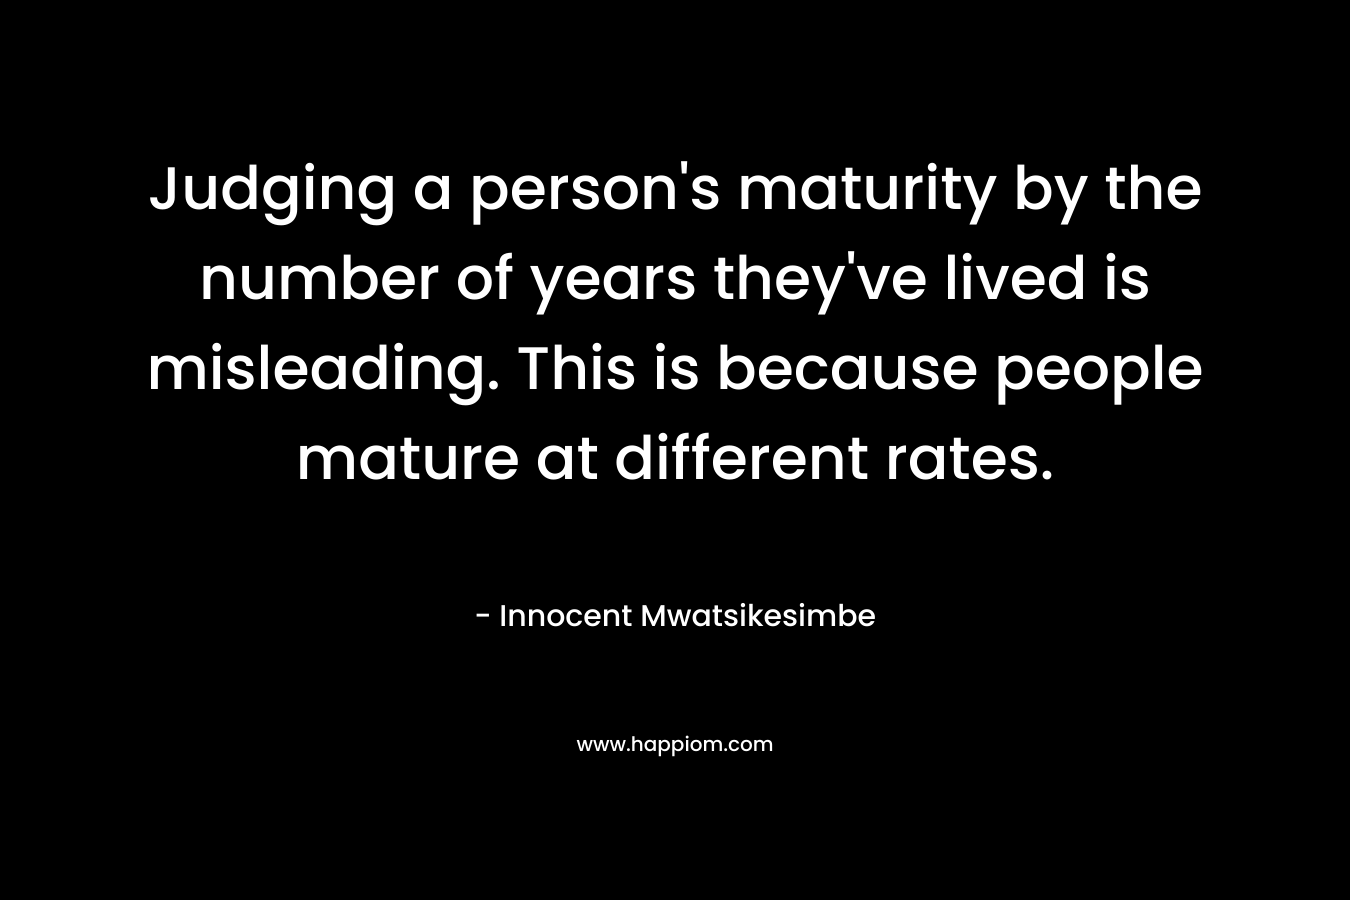 Judging a person’s maturity by the number of years they’ve lived is misleading. This is because people mature at different rates. – Innocent Mwatsikesimbe